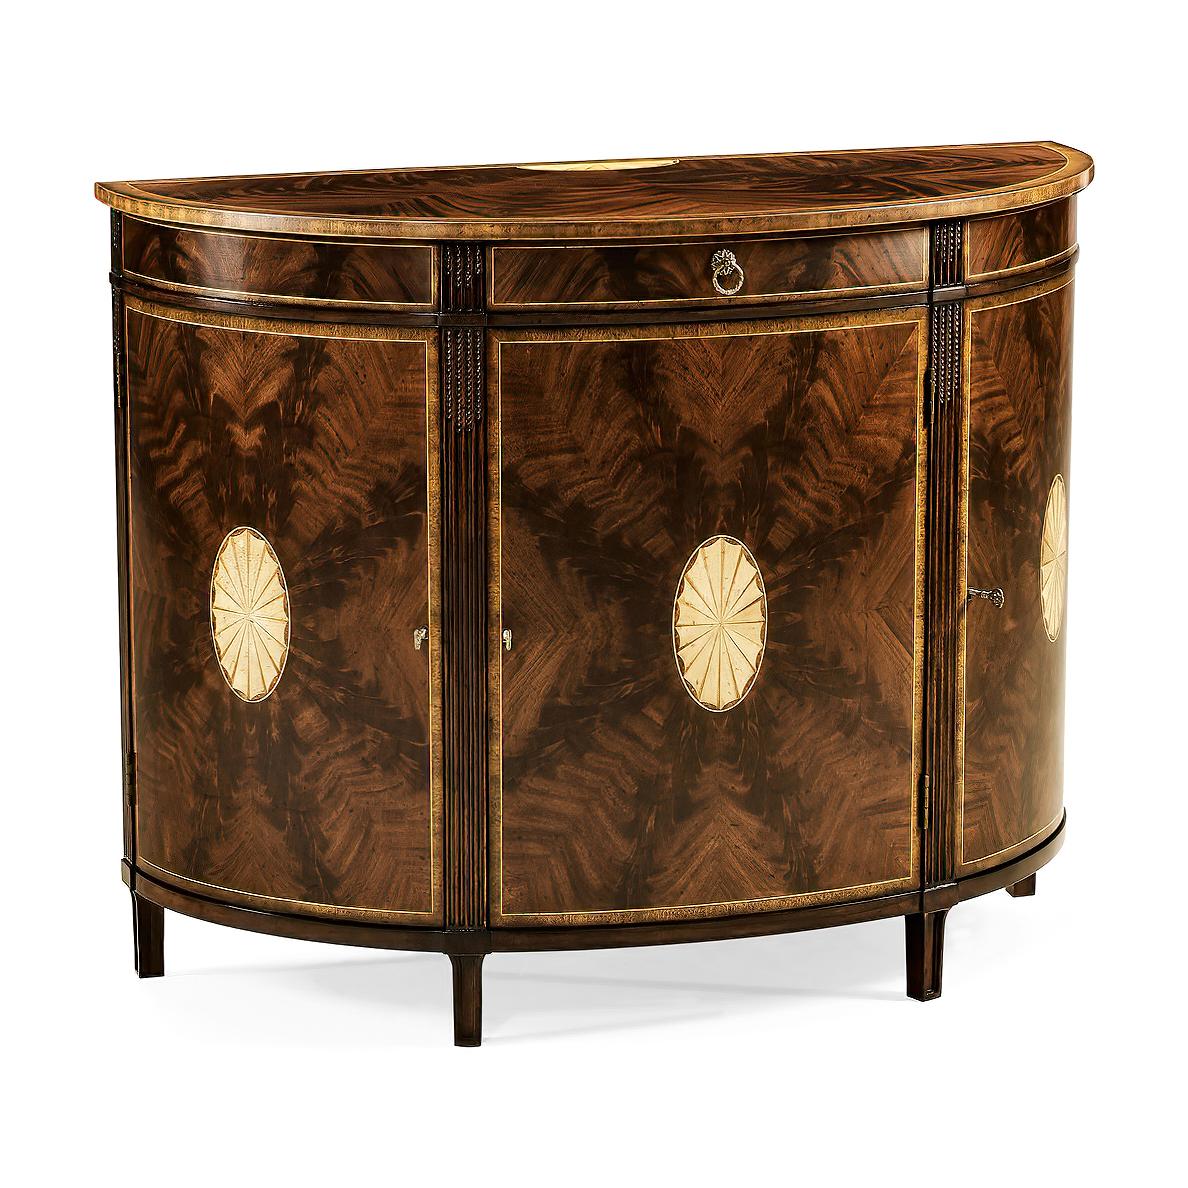 Georgian style crotch mahogany veneered demilune sideboard with contrasting marquetry fan inlays to the top and cupboard doors. With carved stop fluted details, three doors and one drawer with oak secondary woods, an adjustable shelf within and